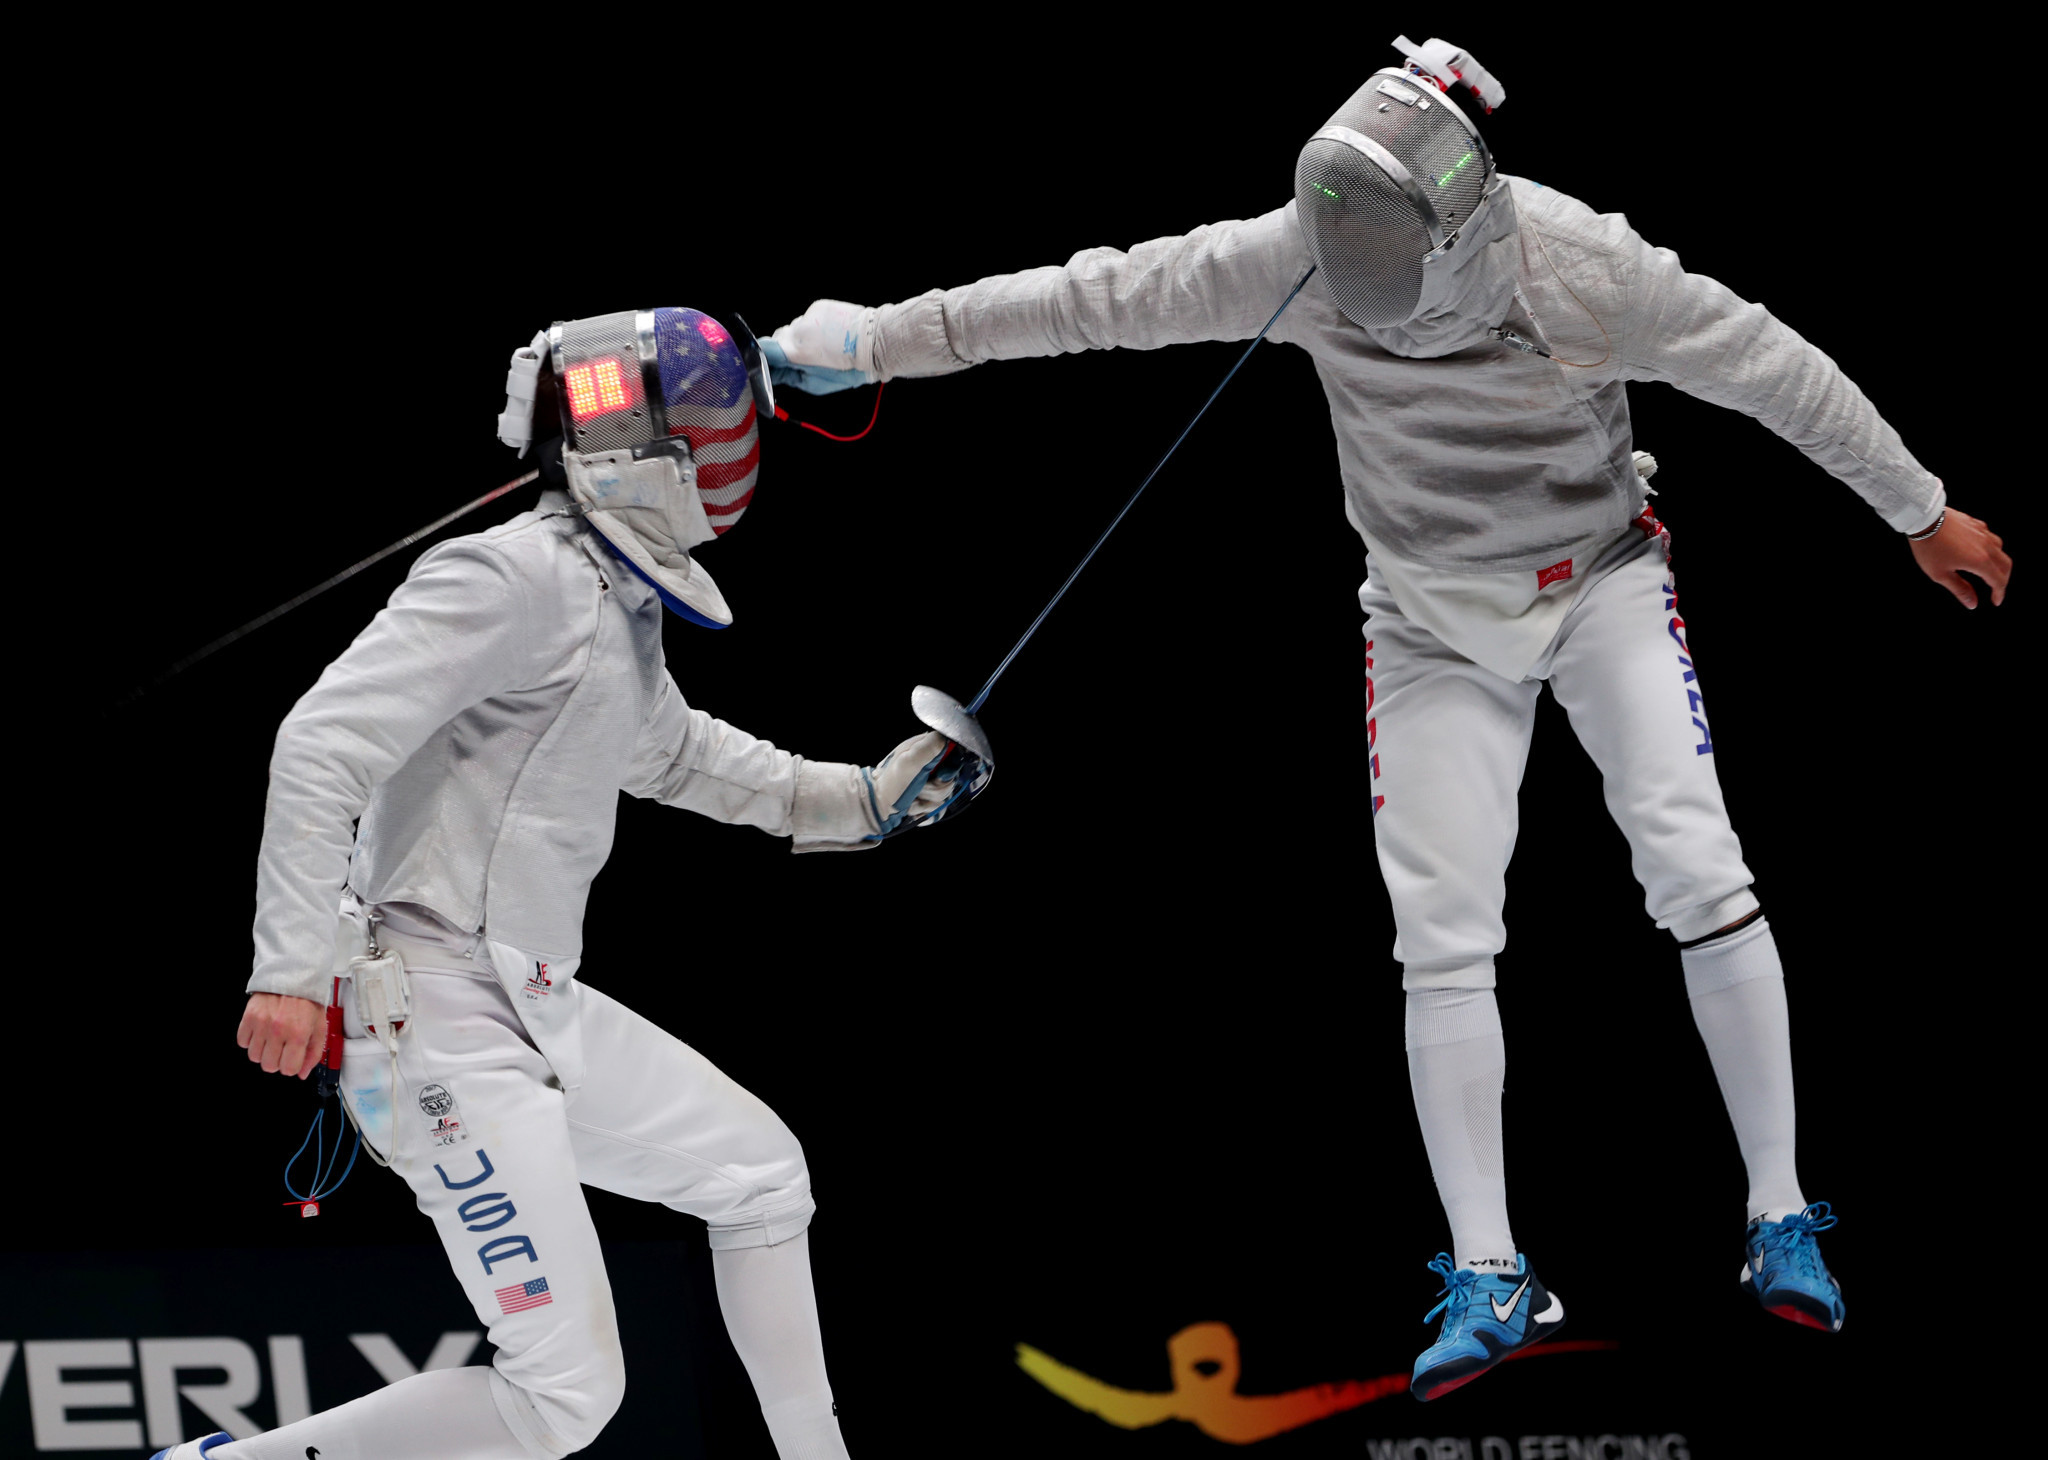 Top fencers head to Madrid and Tunis for latest FIE Sabre World Cups